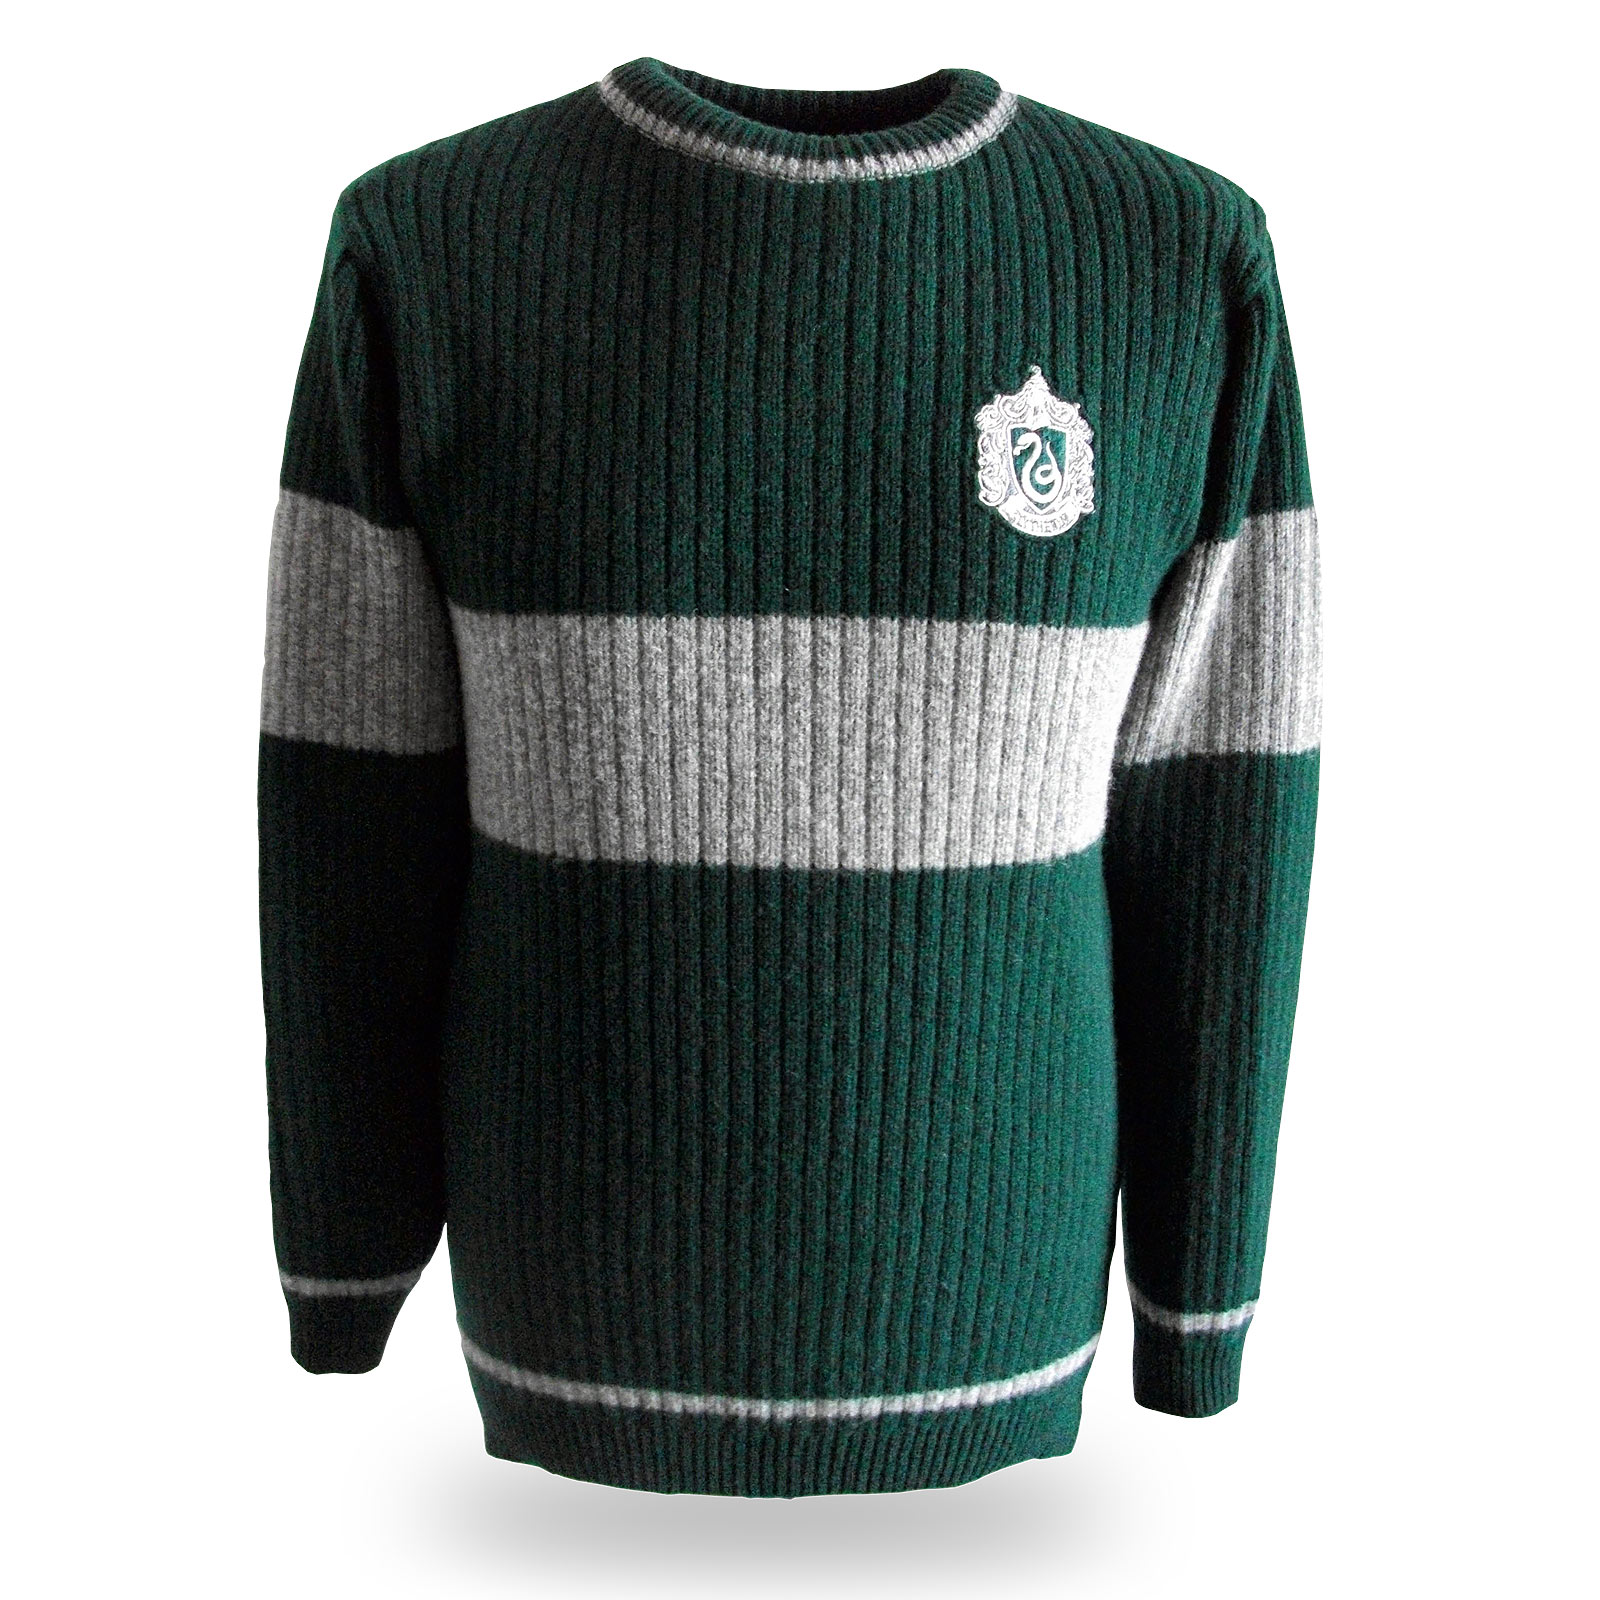 Harry Potter - Quidditch Sweater Slytherin